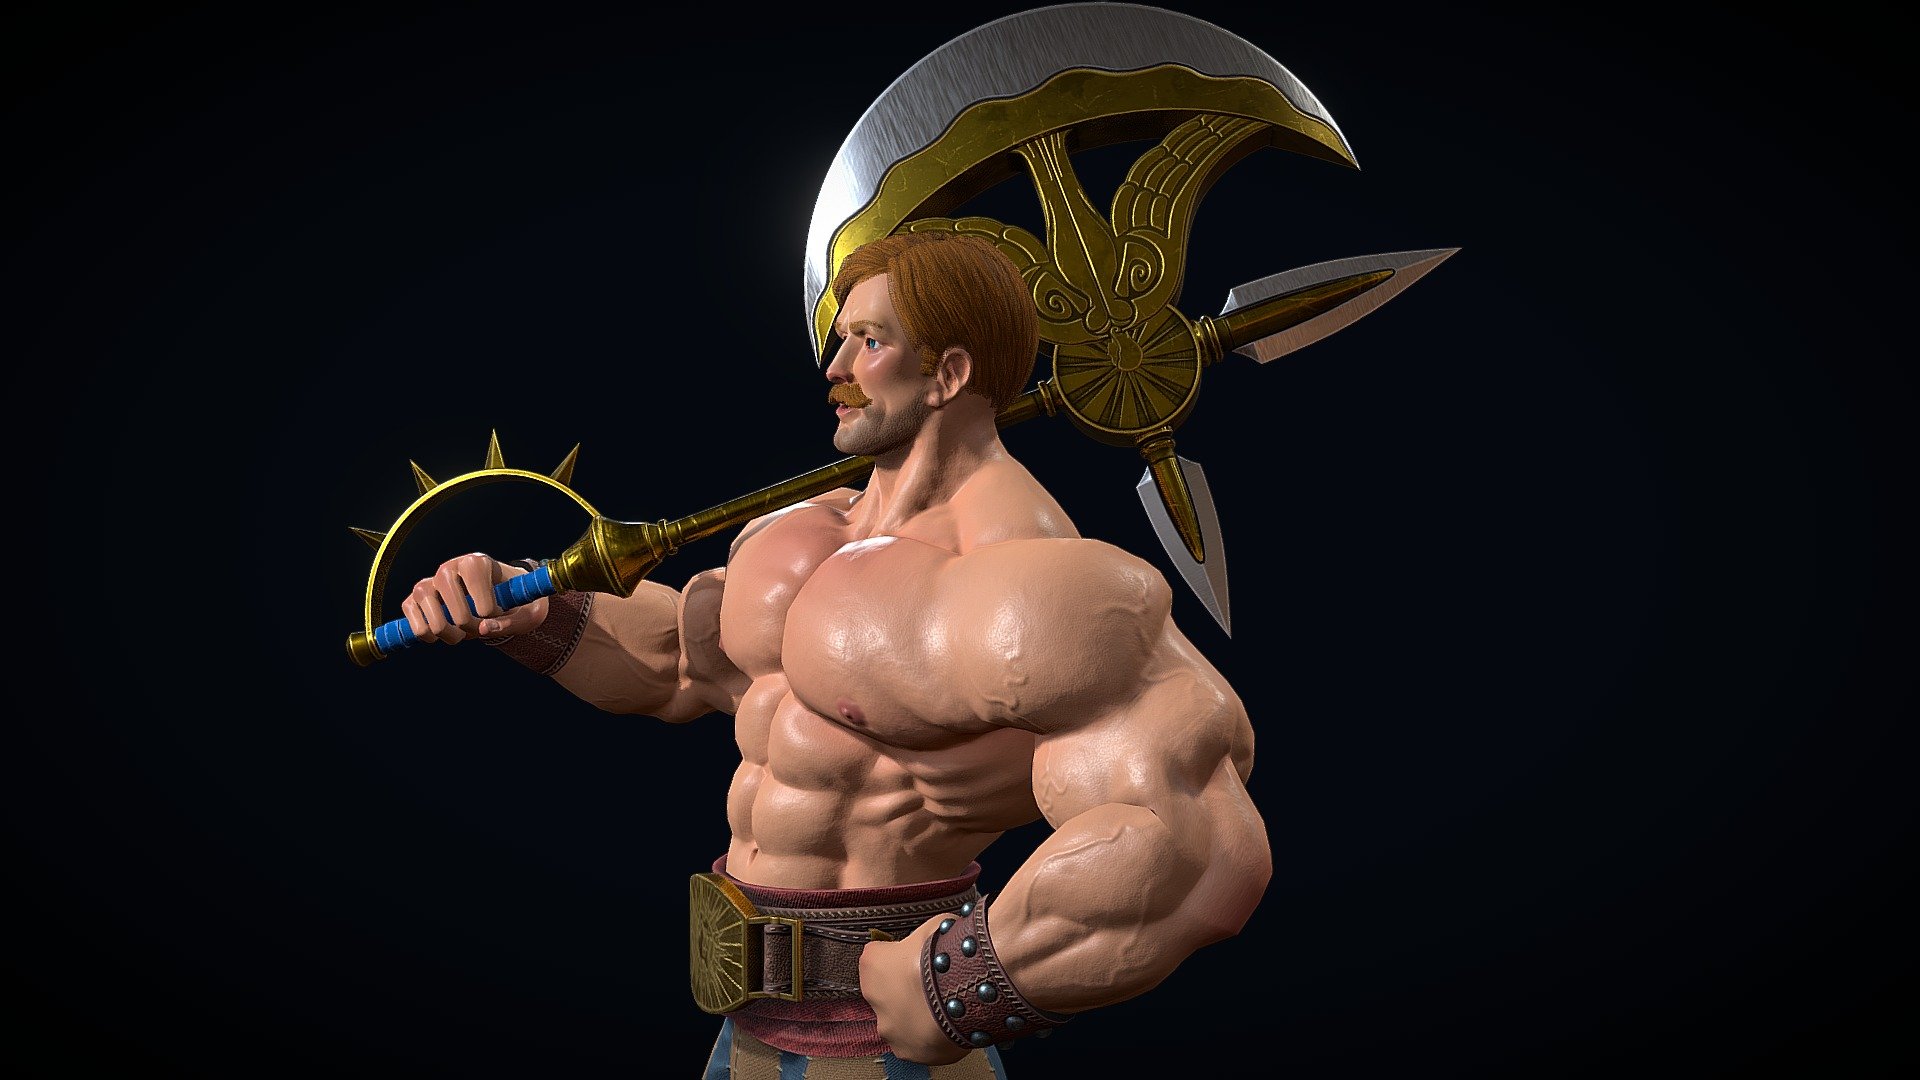 Low-poly 3D model of the Escanor the Lion's Sin of Pride, a character from the manga and anime &ldquo;The Seven Deadly Sins